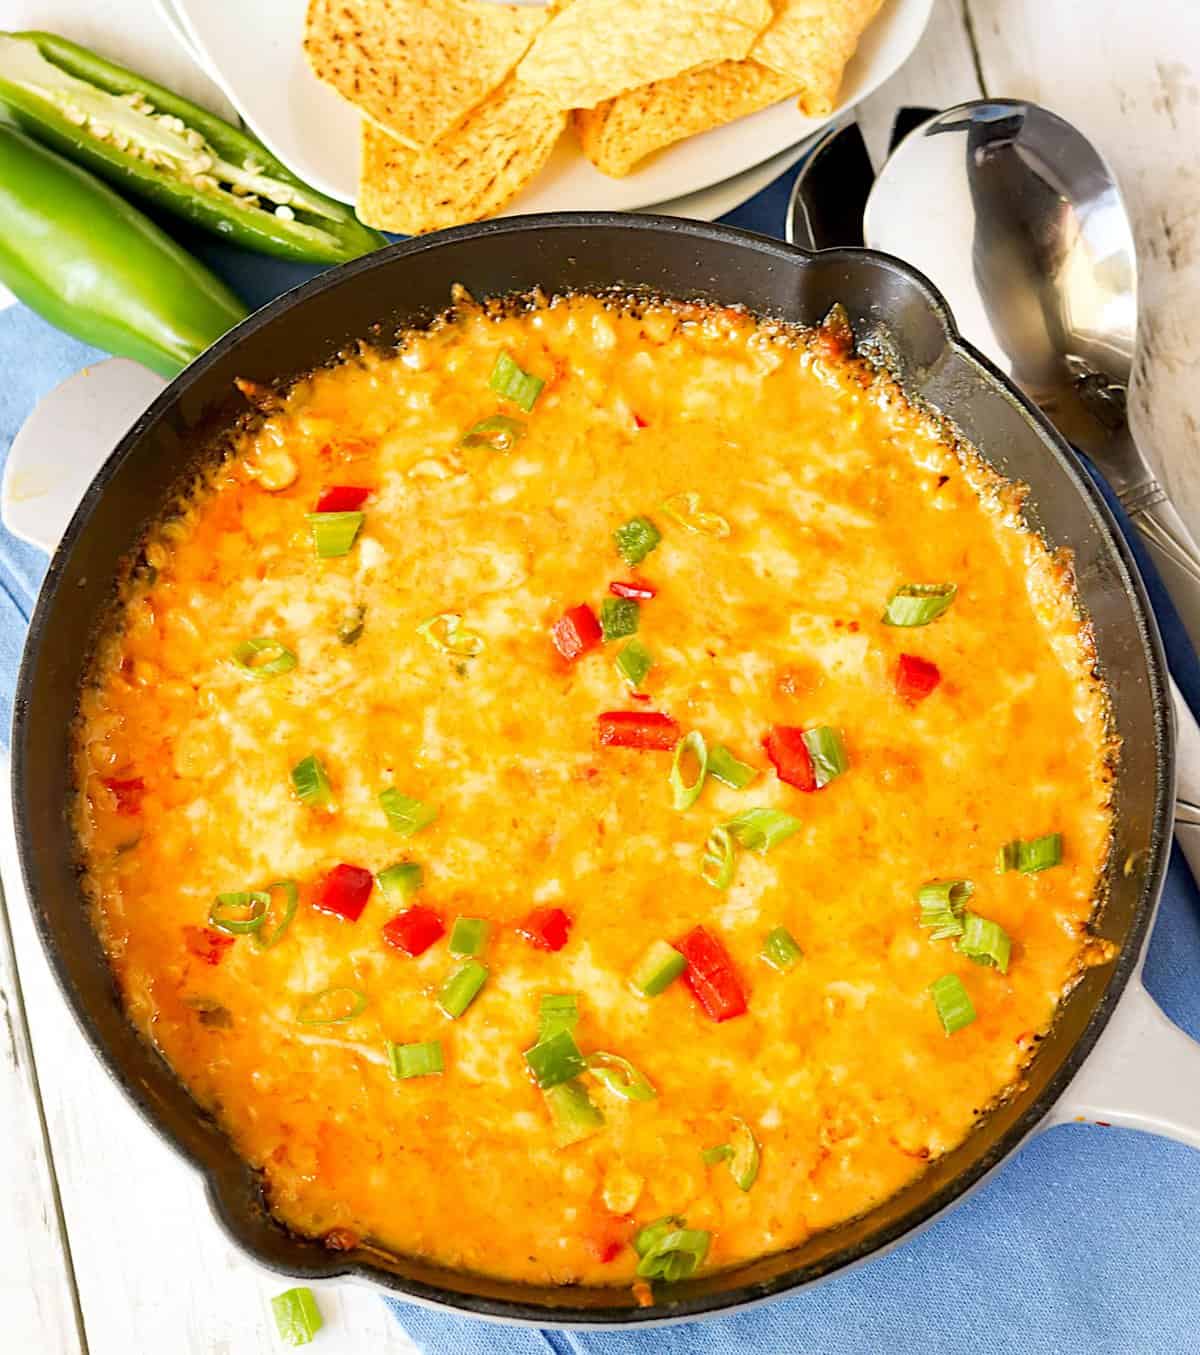 Taking fresh skillet with hot corn dip from the oven 